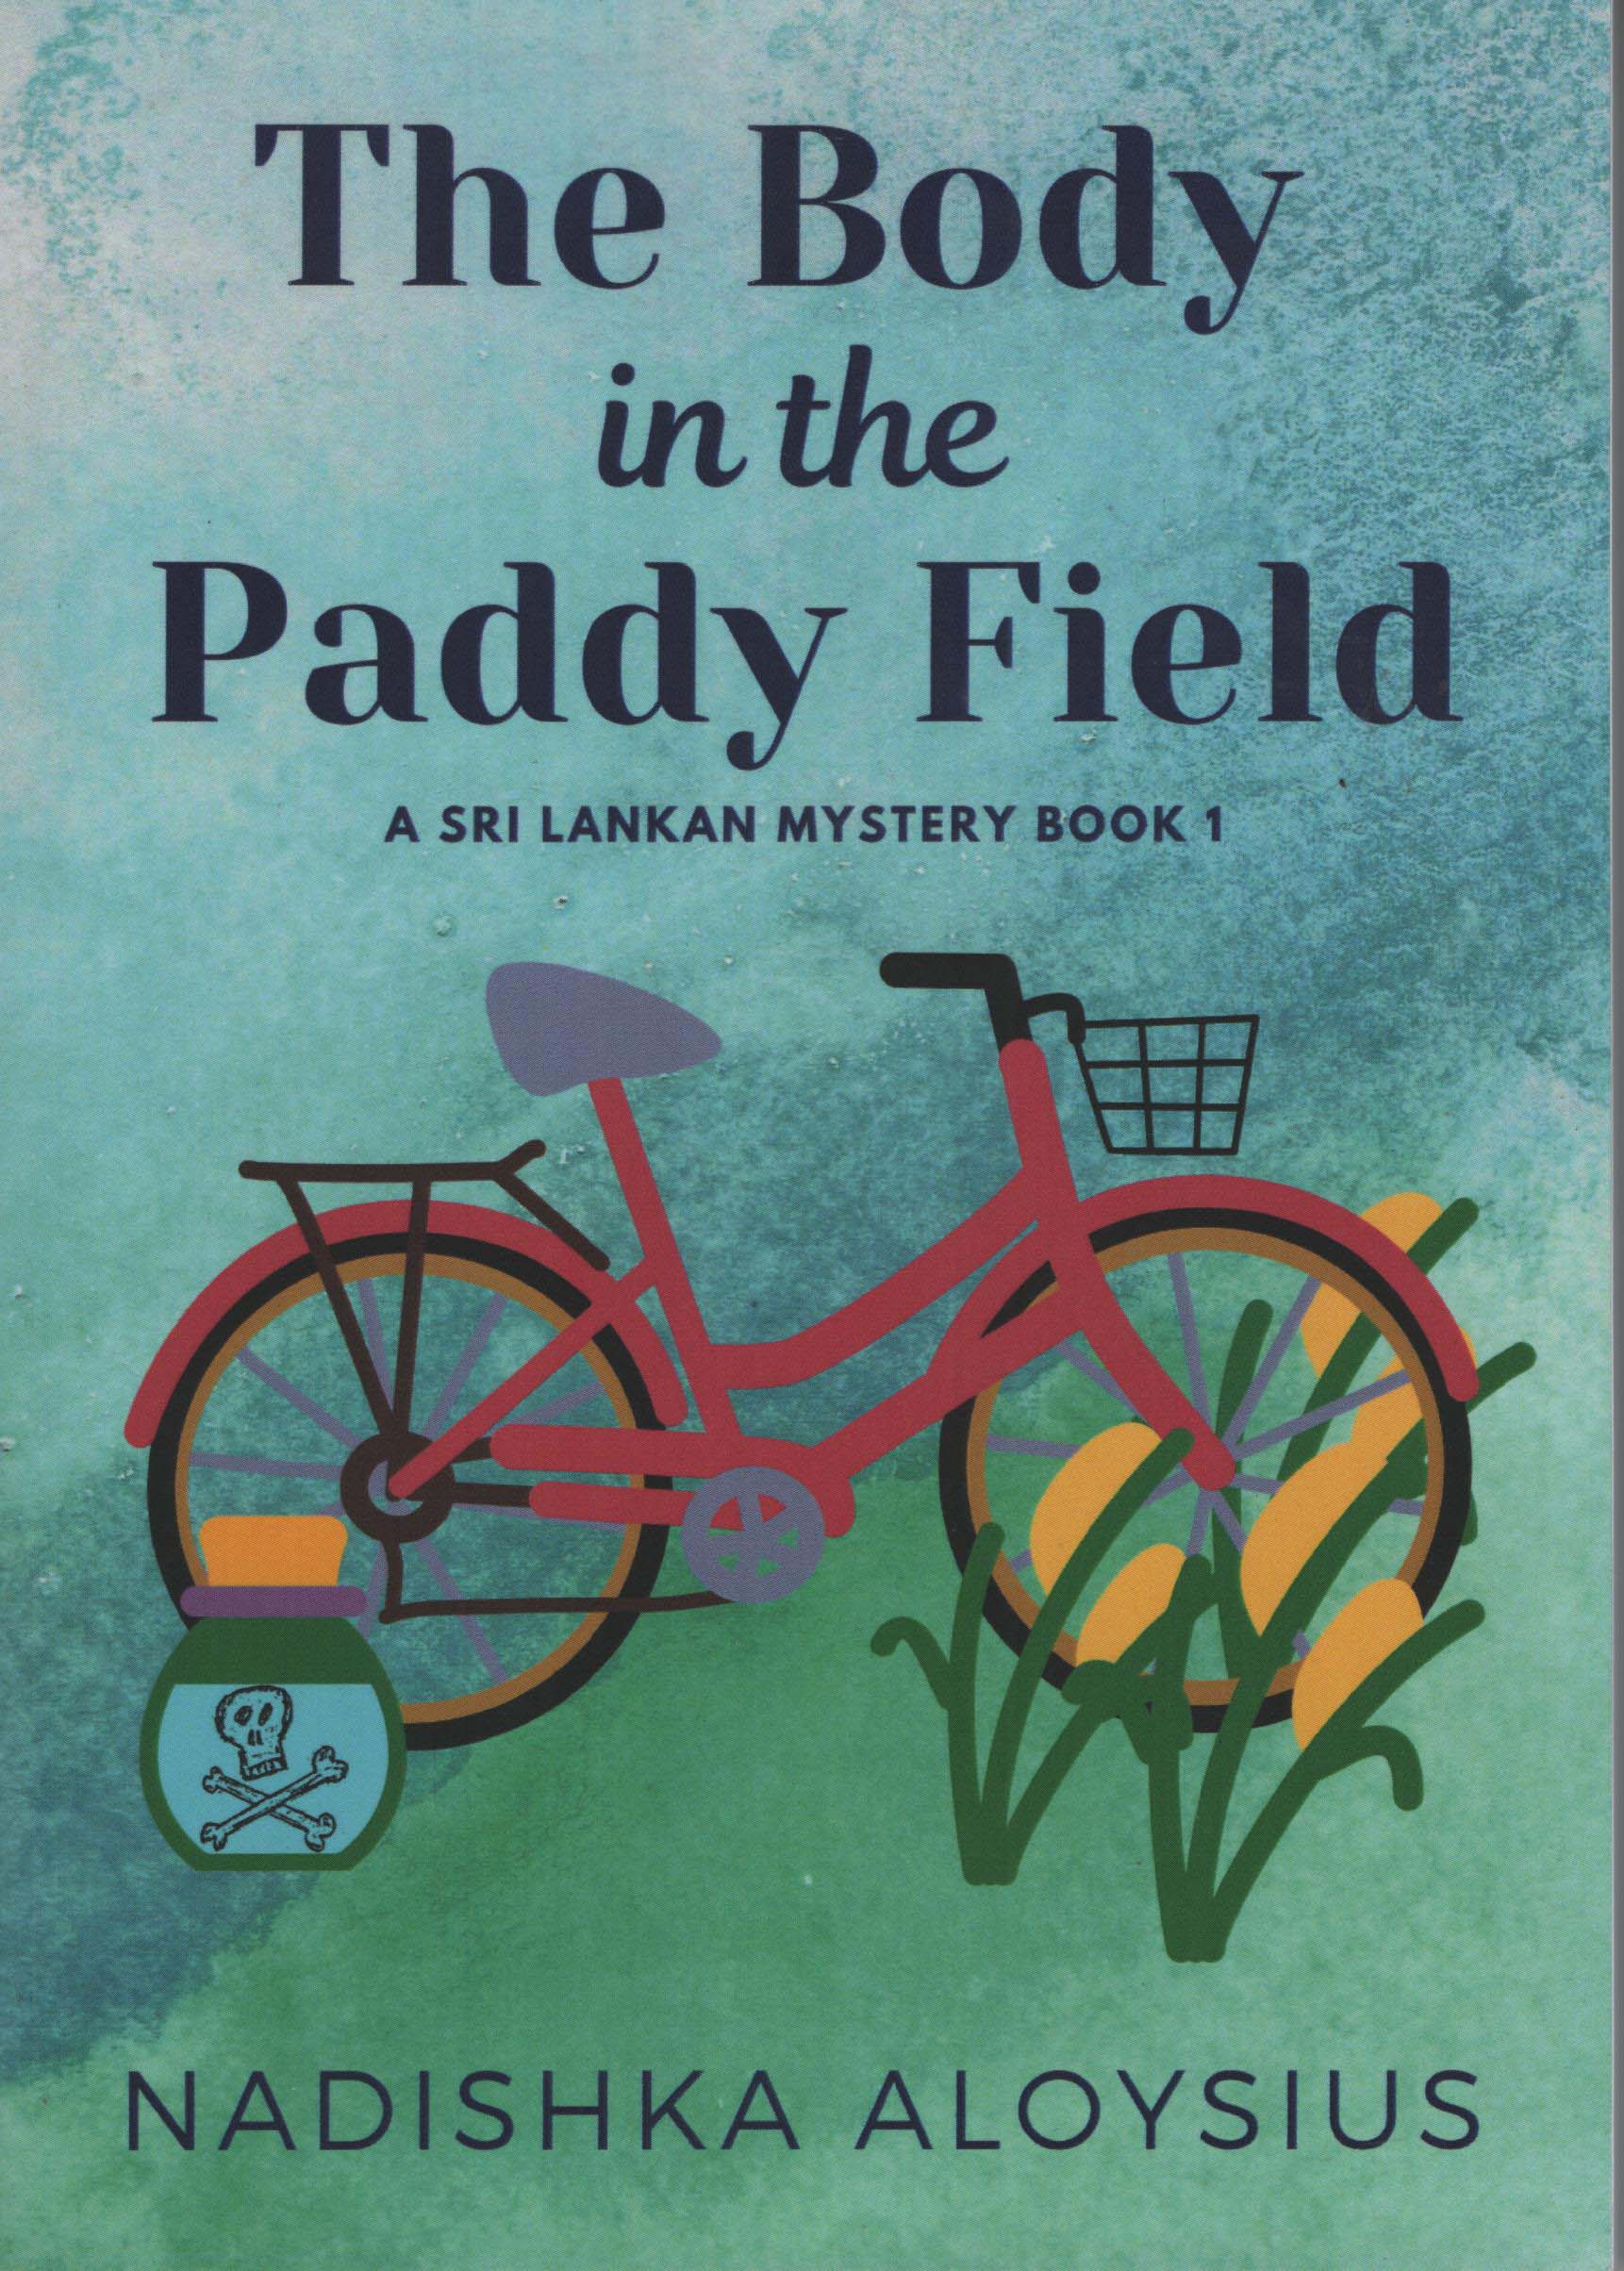 The Body in the Paddy Field A Sri Lankan Mystery Book 1